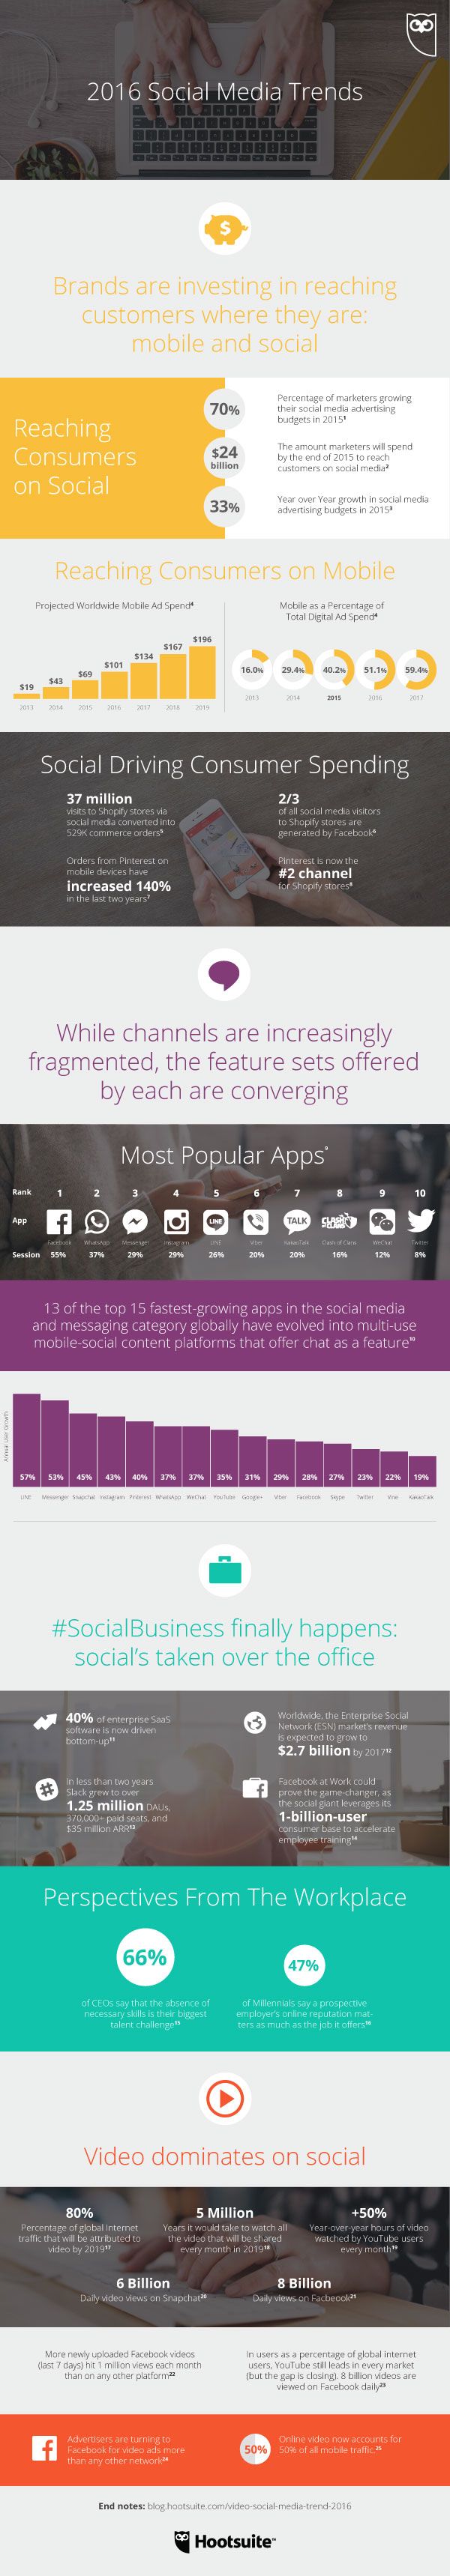 Marketing-Infographic-2016-SocialMediaTrends.-Brands-are-investing-in-reaching-customers-where-they Marketing Infographic : 2016 #SocialMediaTrends.  Brands are investing in reaching customers where they ...